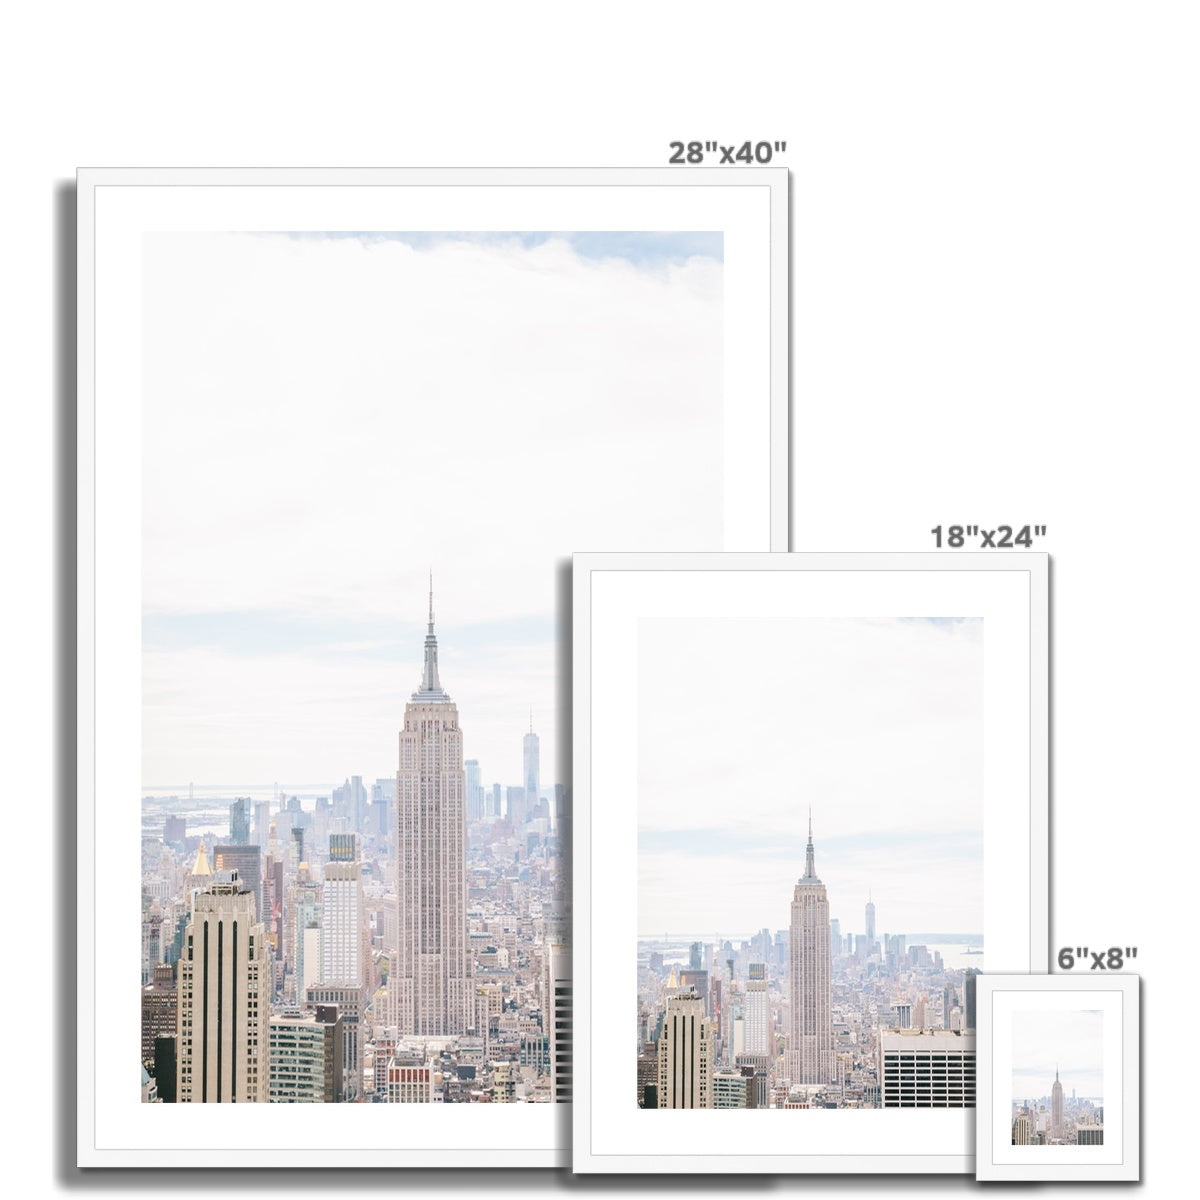 EMPIRE STATE BUILDING Framed & Mounted Print